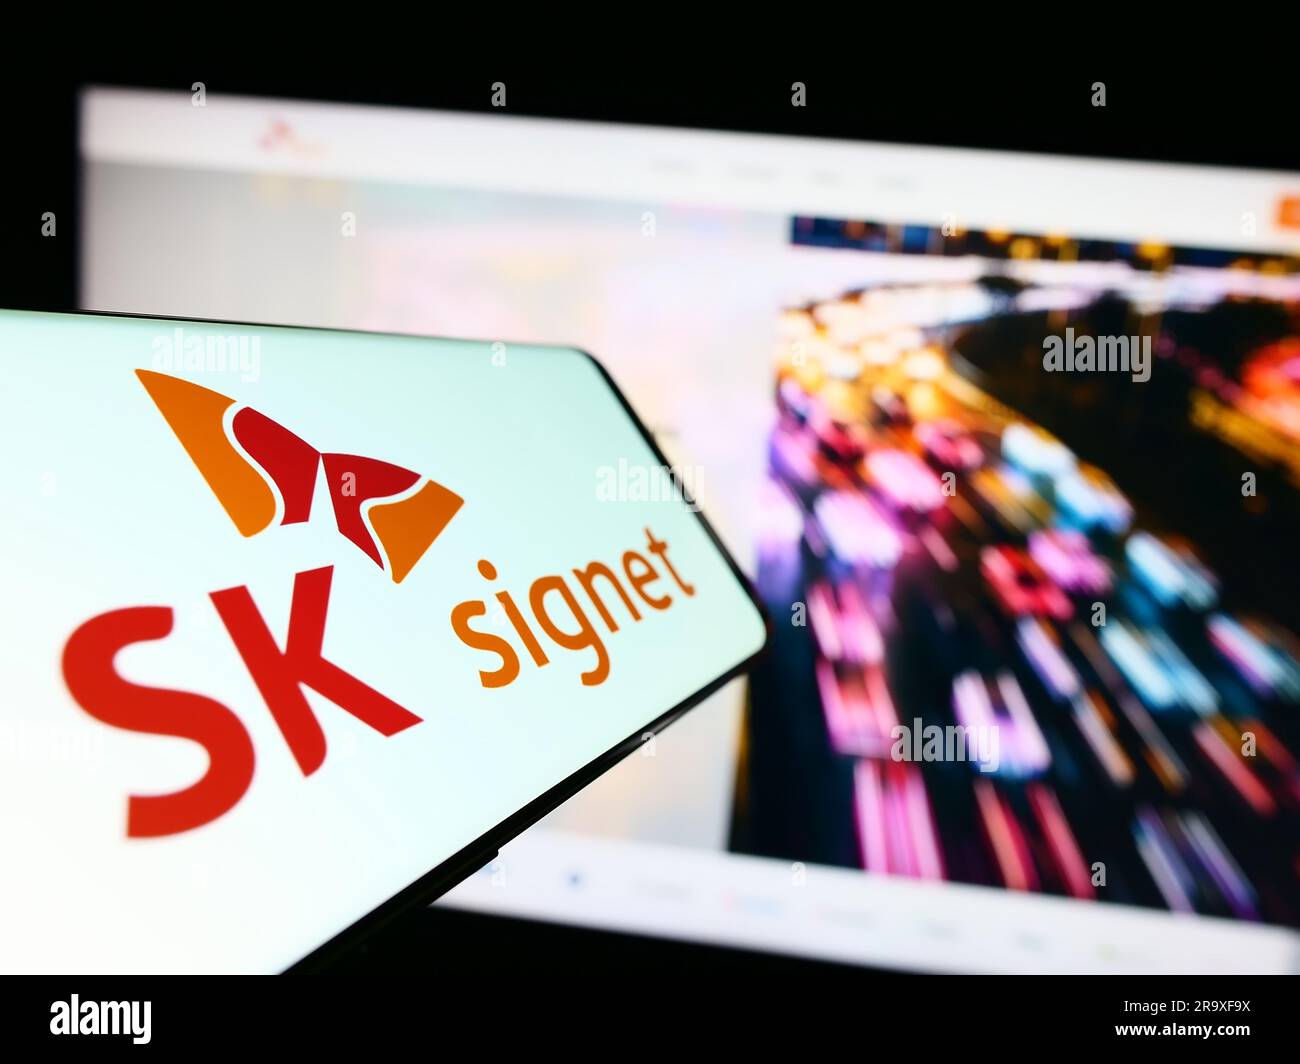 Mobile phone with logo of Korean EV charging company SK Signet on screen in front of business website. Focus on center-left of phone display. Stock Photo